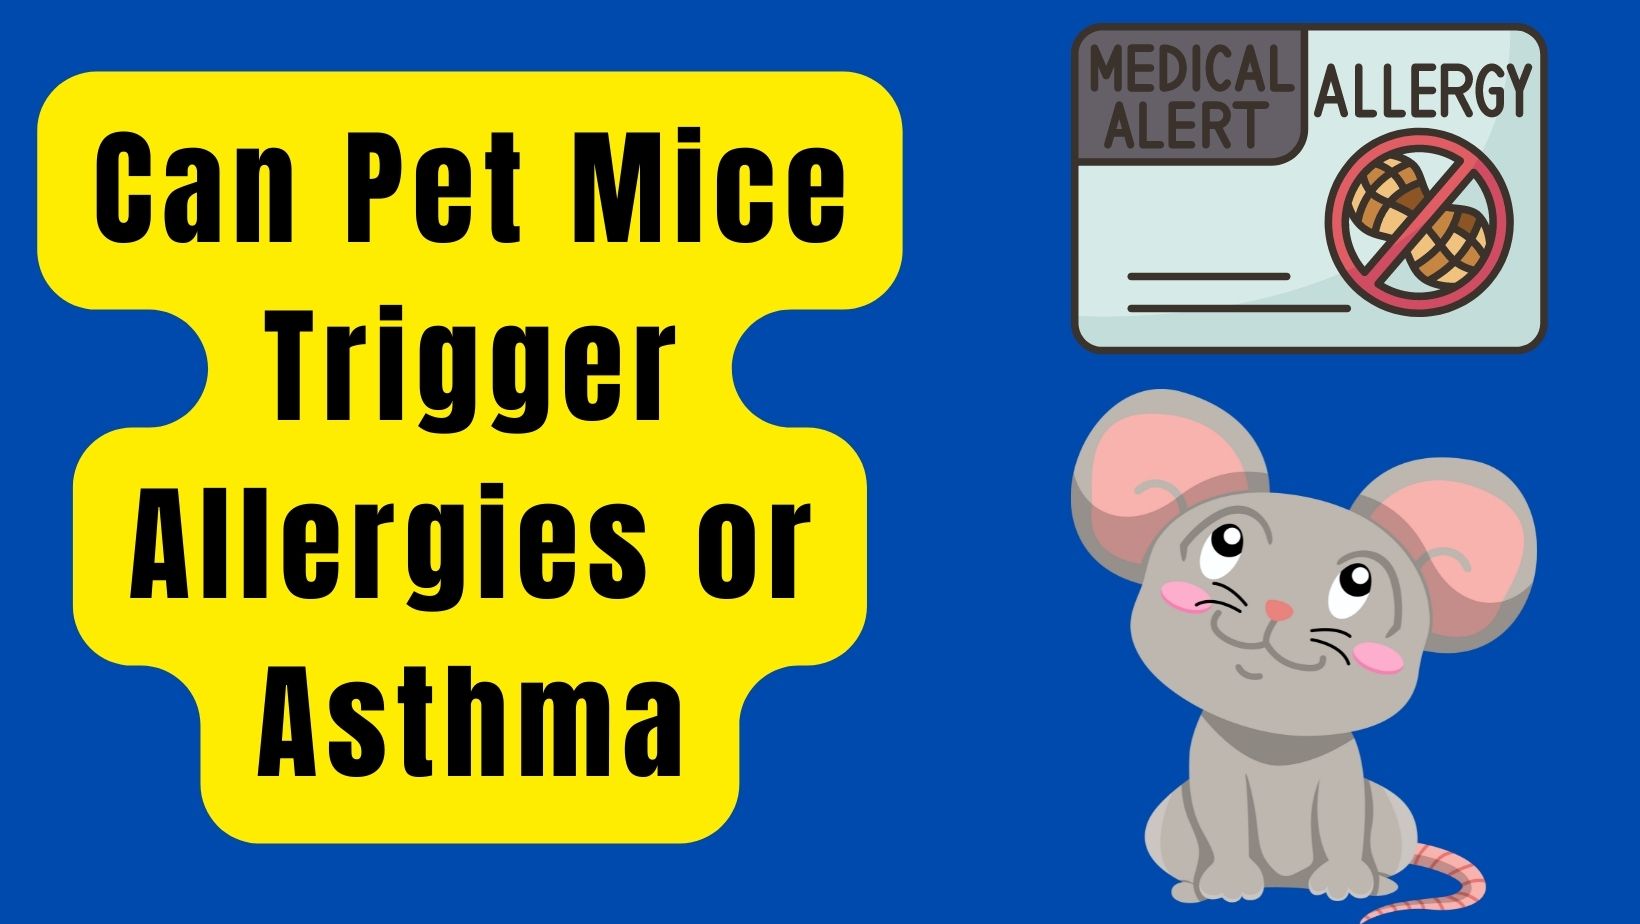 Can Pet Mice Trigger Allergies or Asthma?